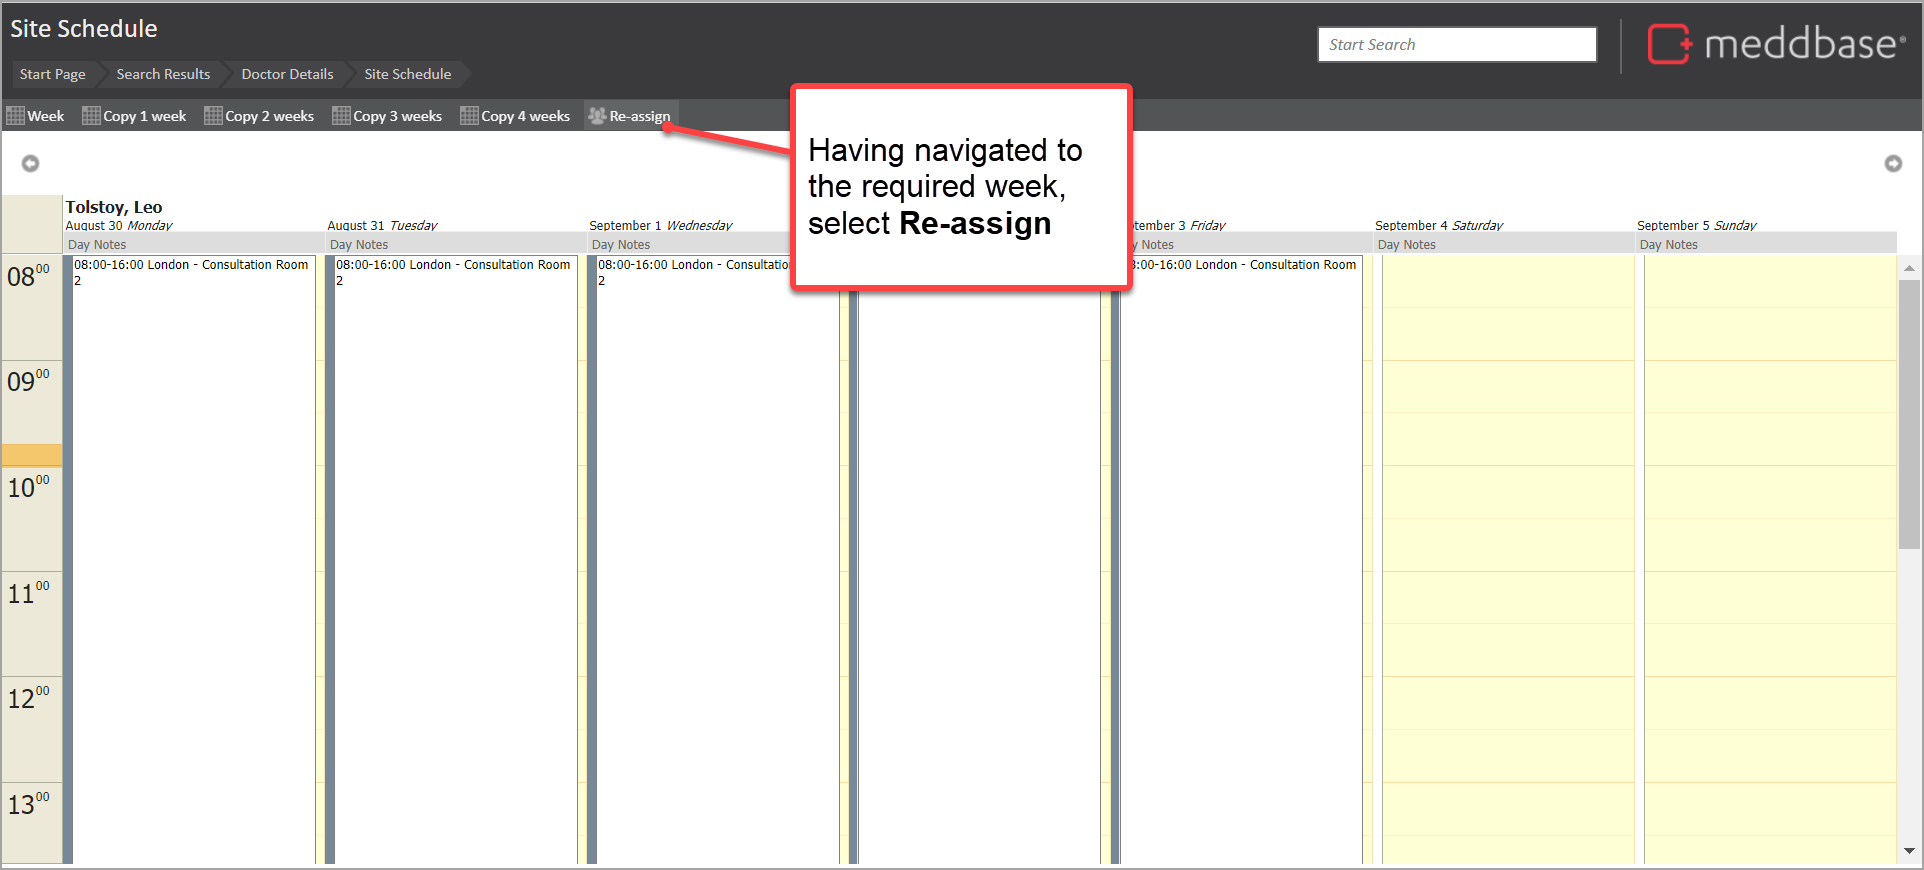 Site schedule with annotation identifying re-assign_button